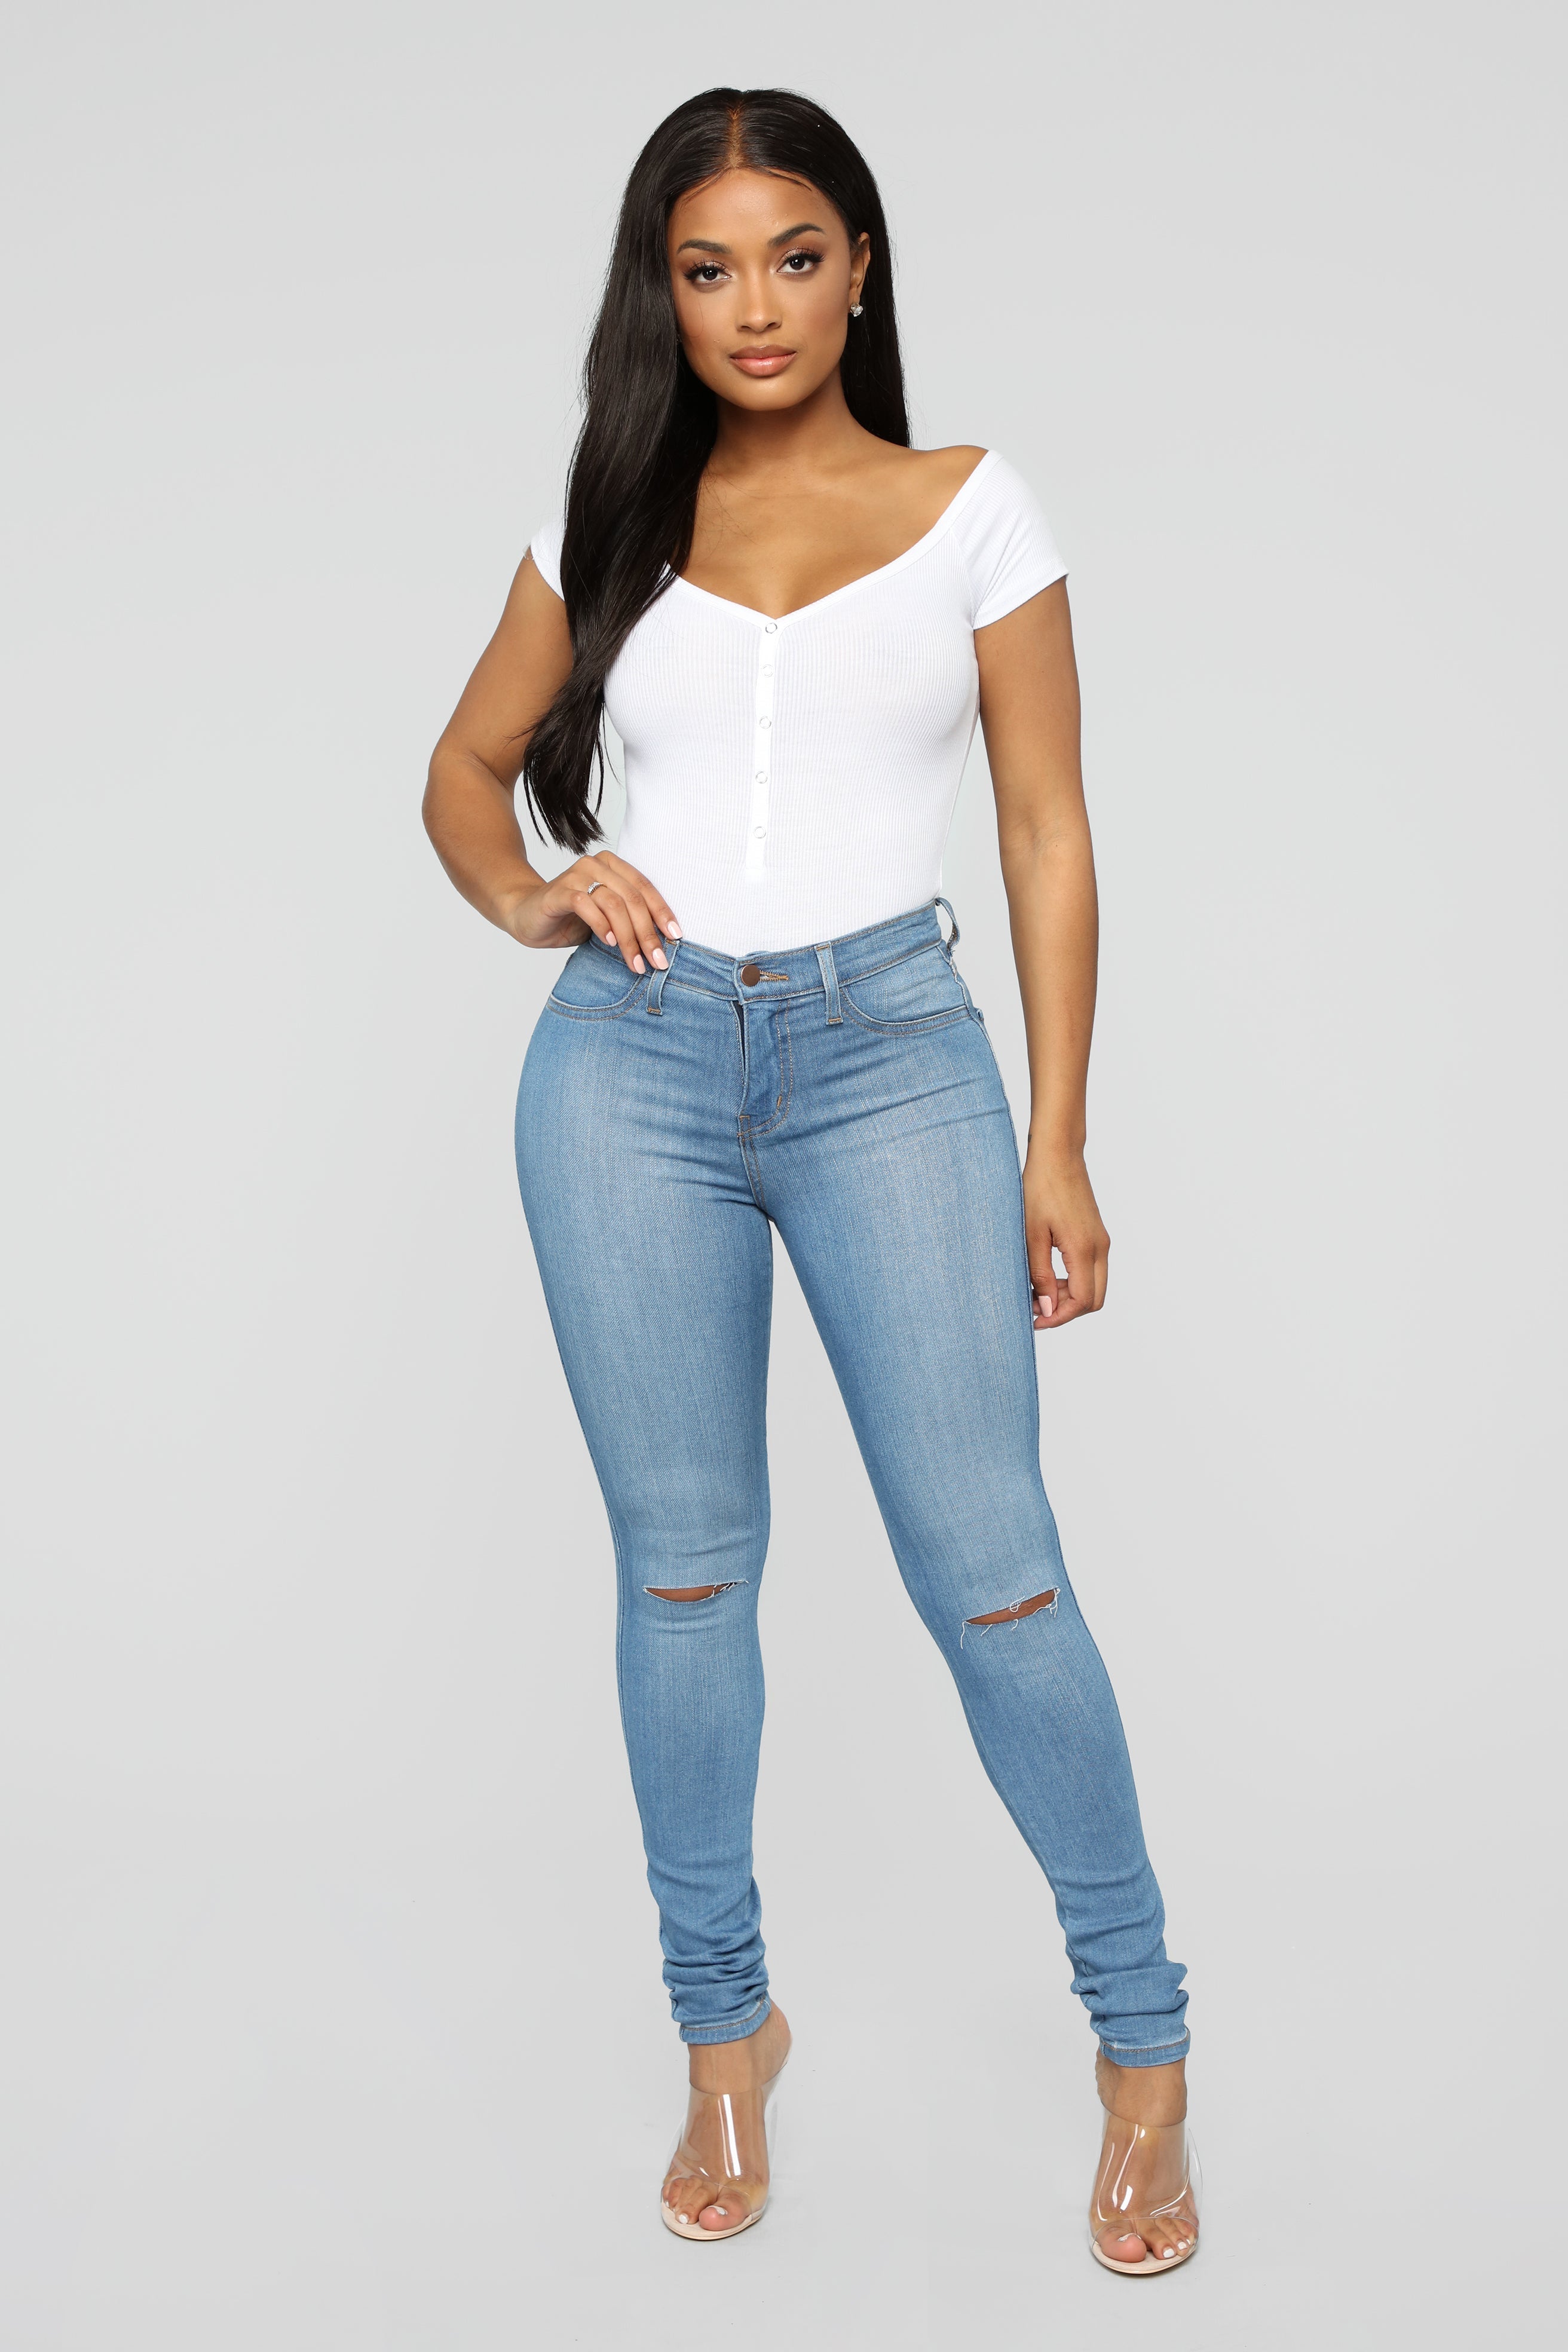 Canopy Jeans - Light Blue Wash